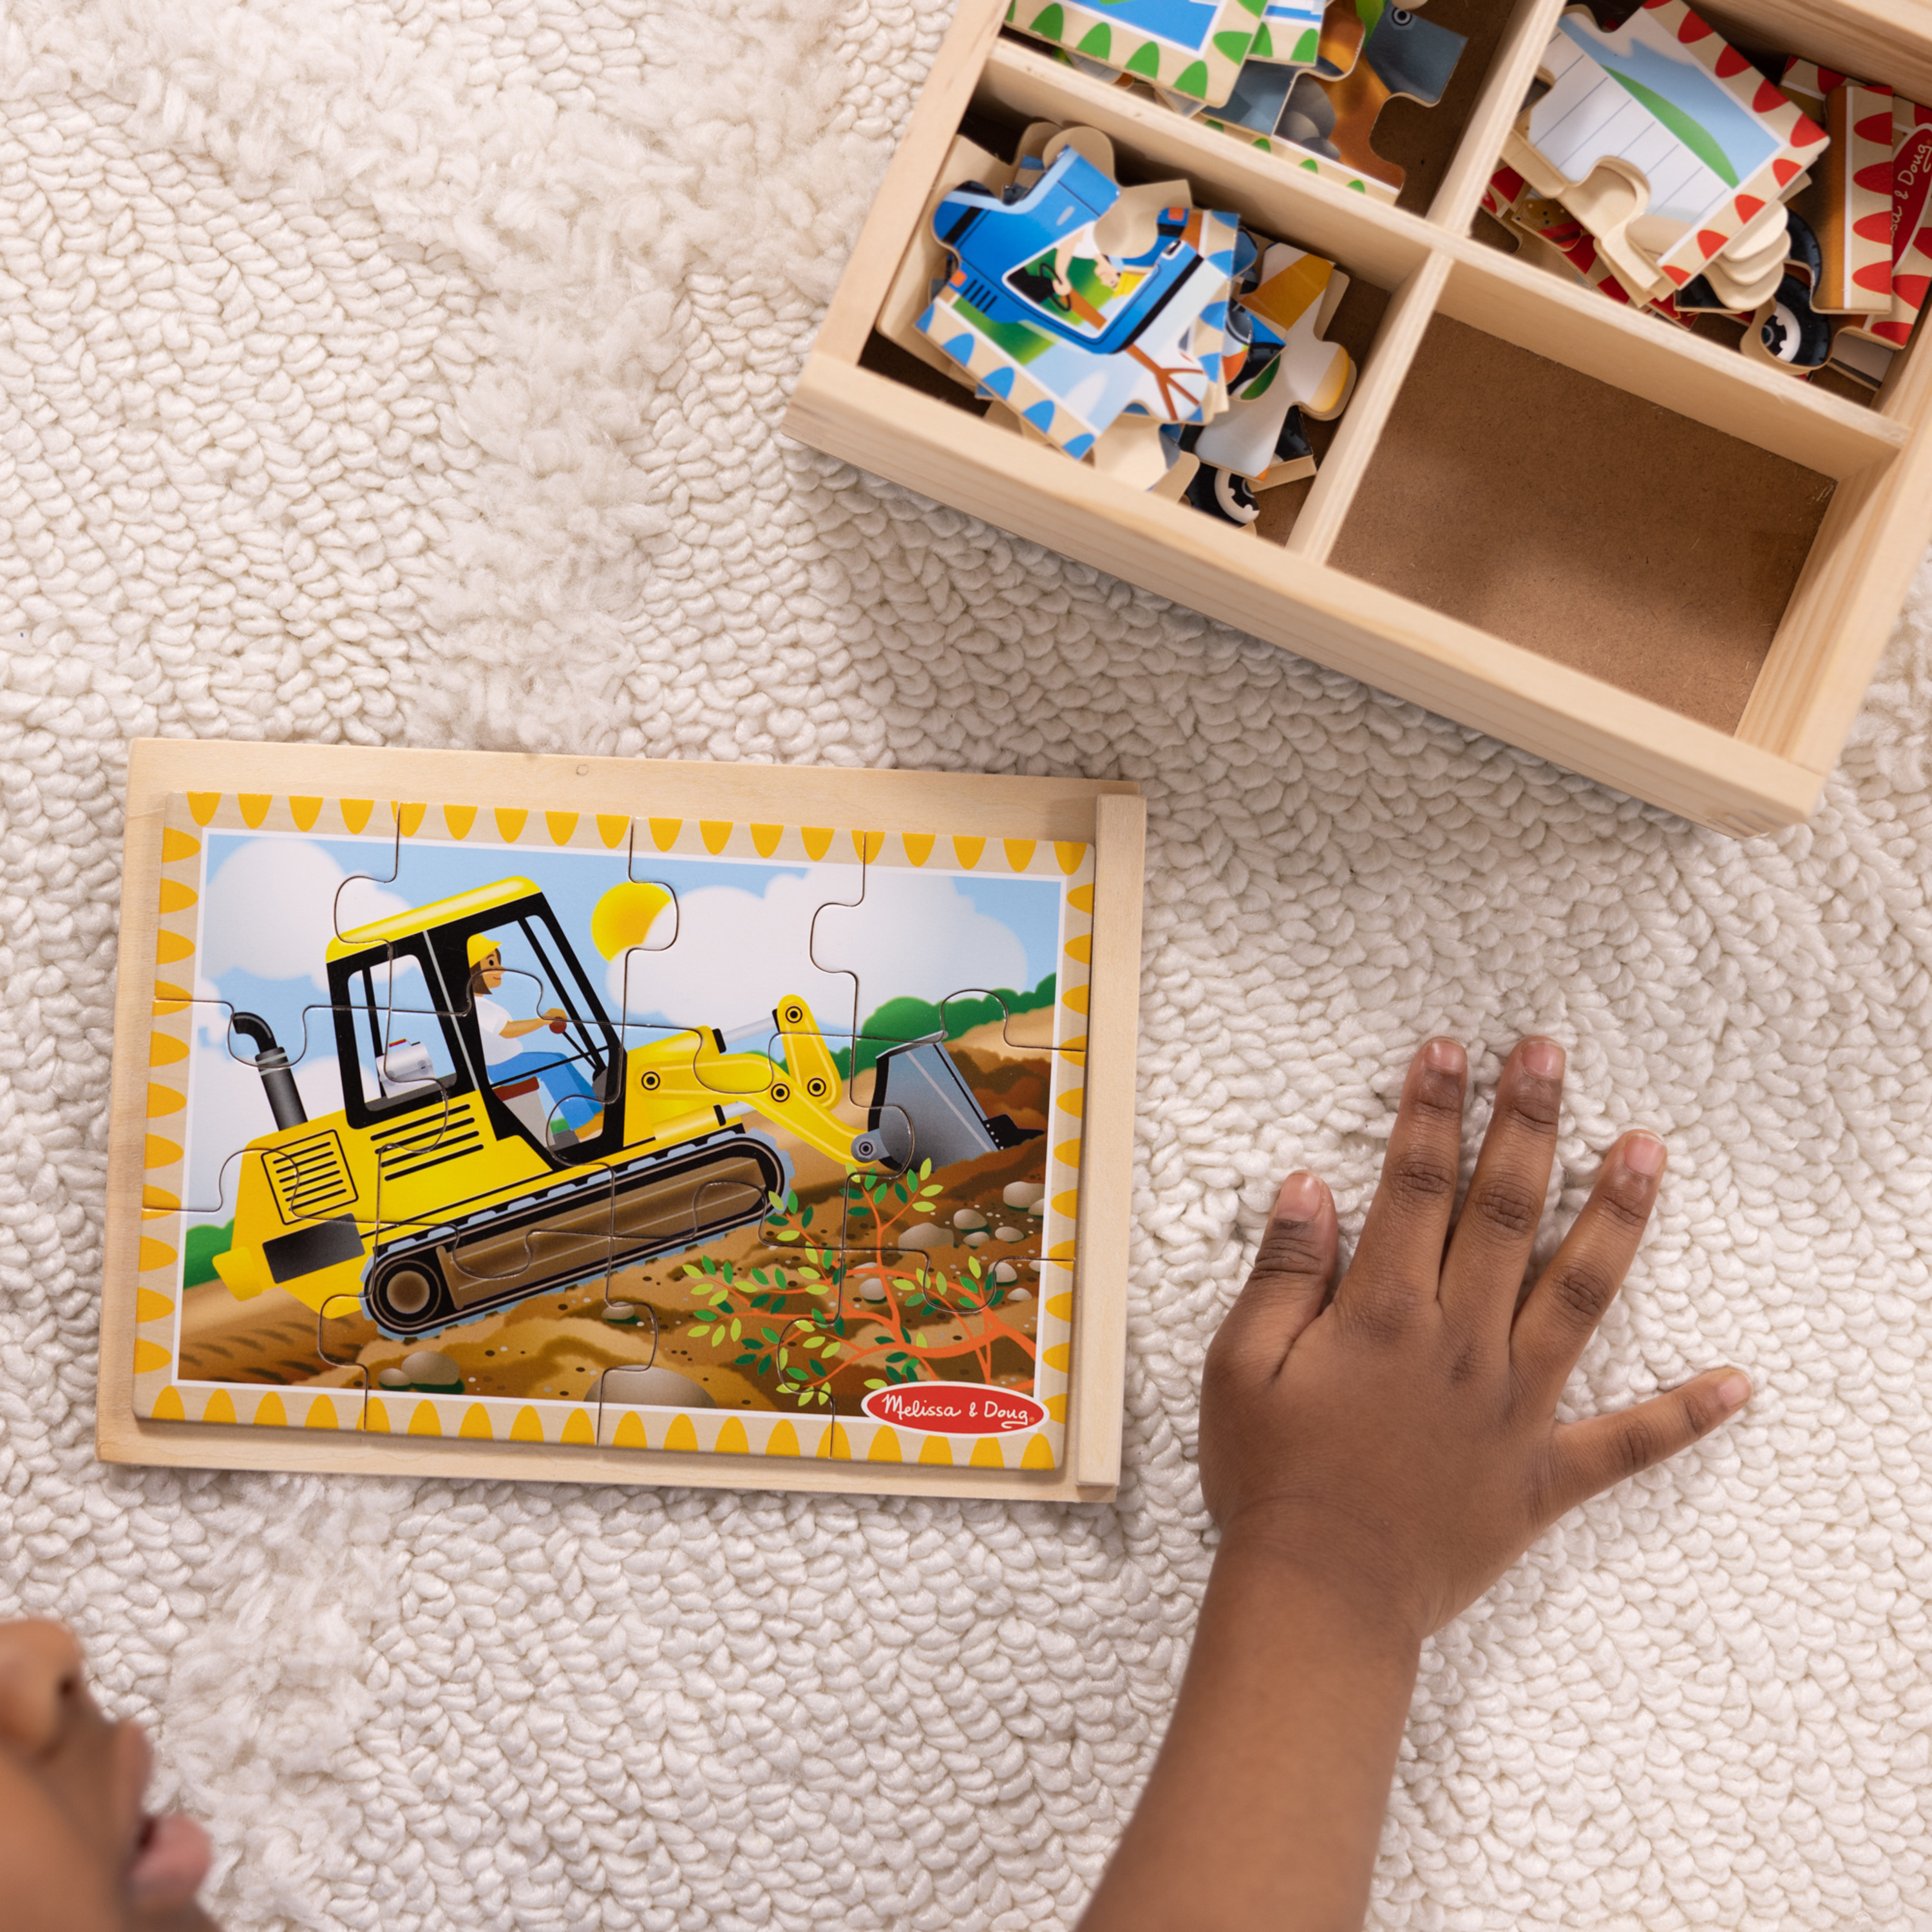 Melissa & Doug Construction Vehicles 4-in-1 Wooden Jigsaw Puzzles in a Box (48 pcs) - FSC Certified - image 3 of 10